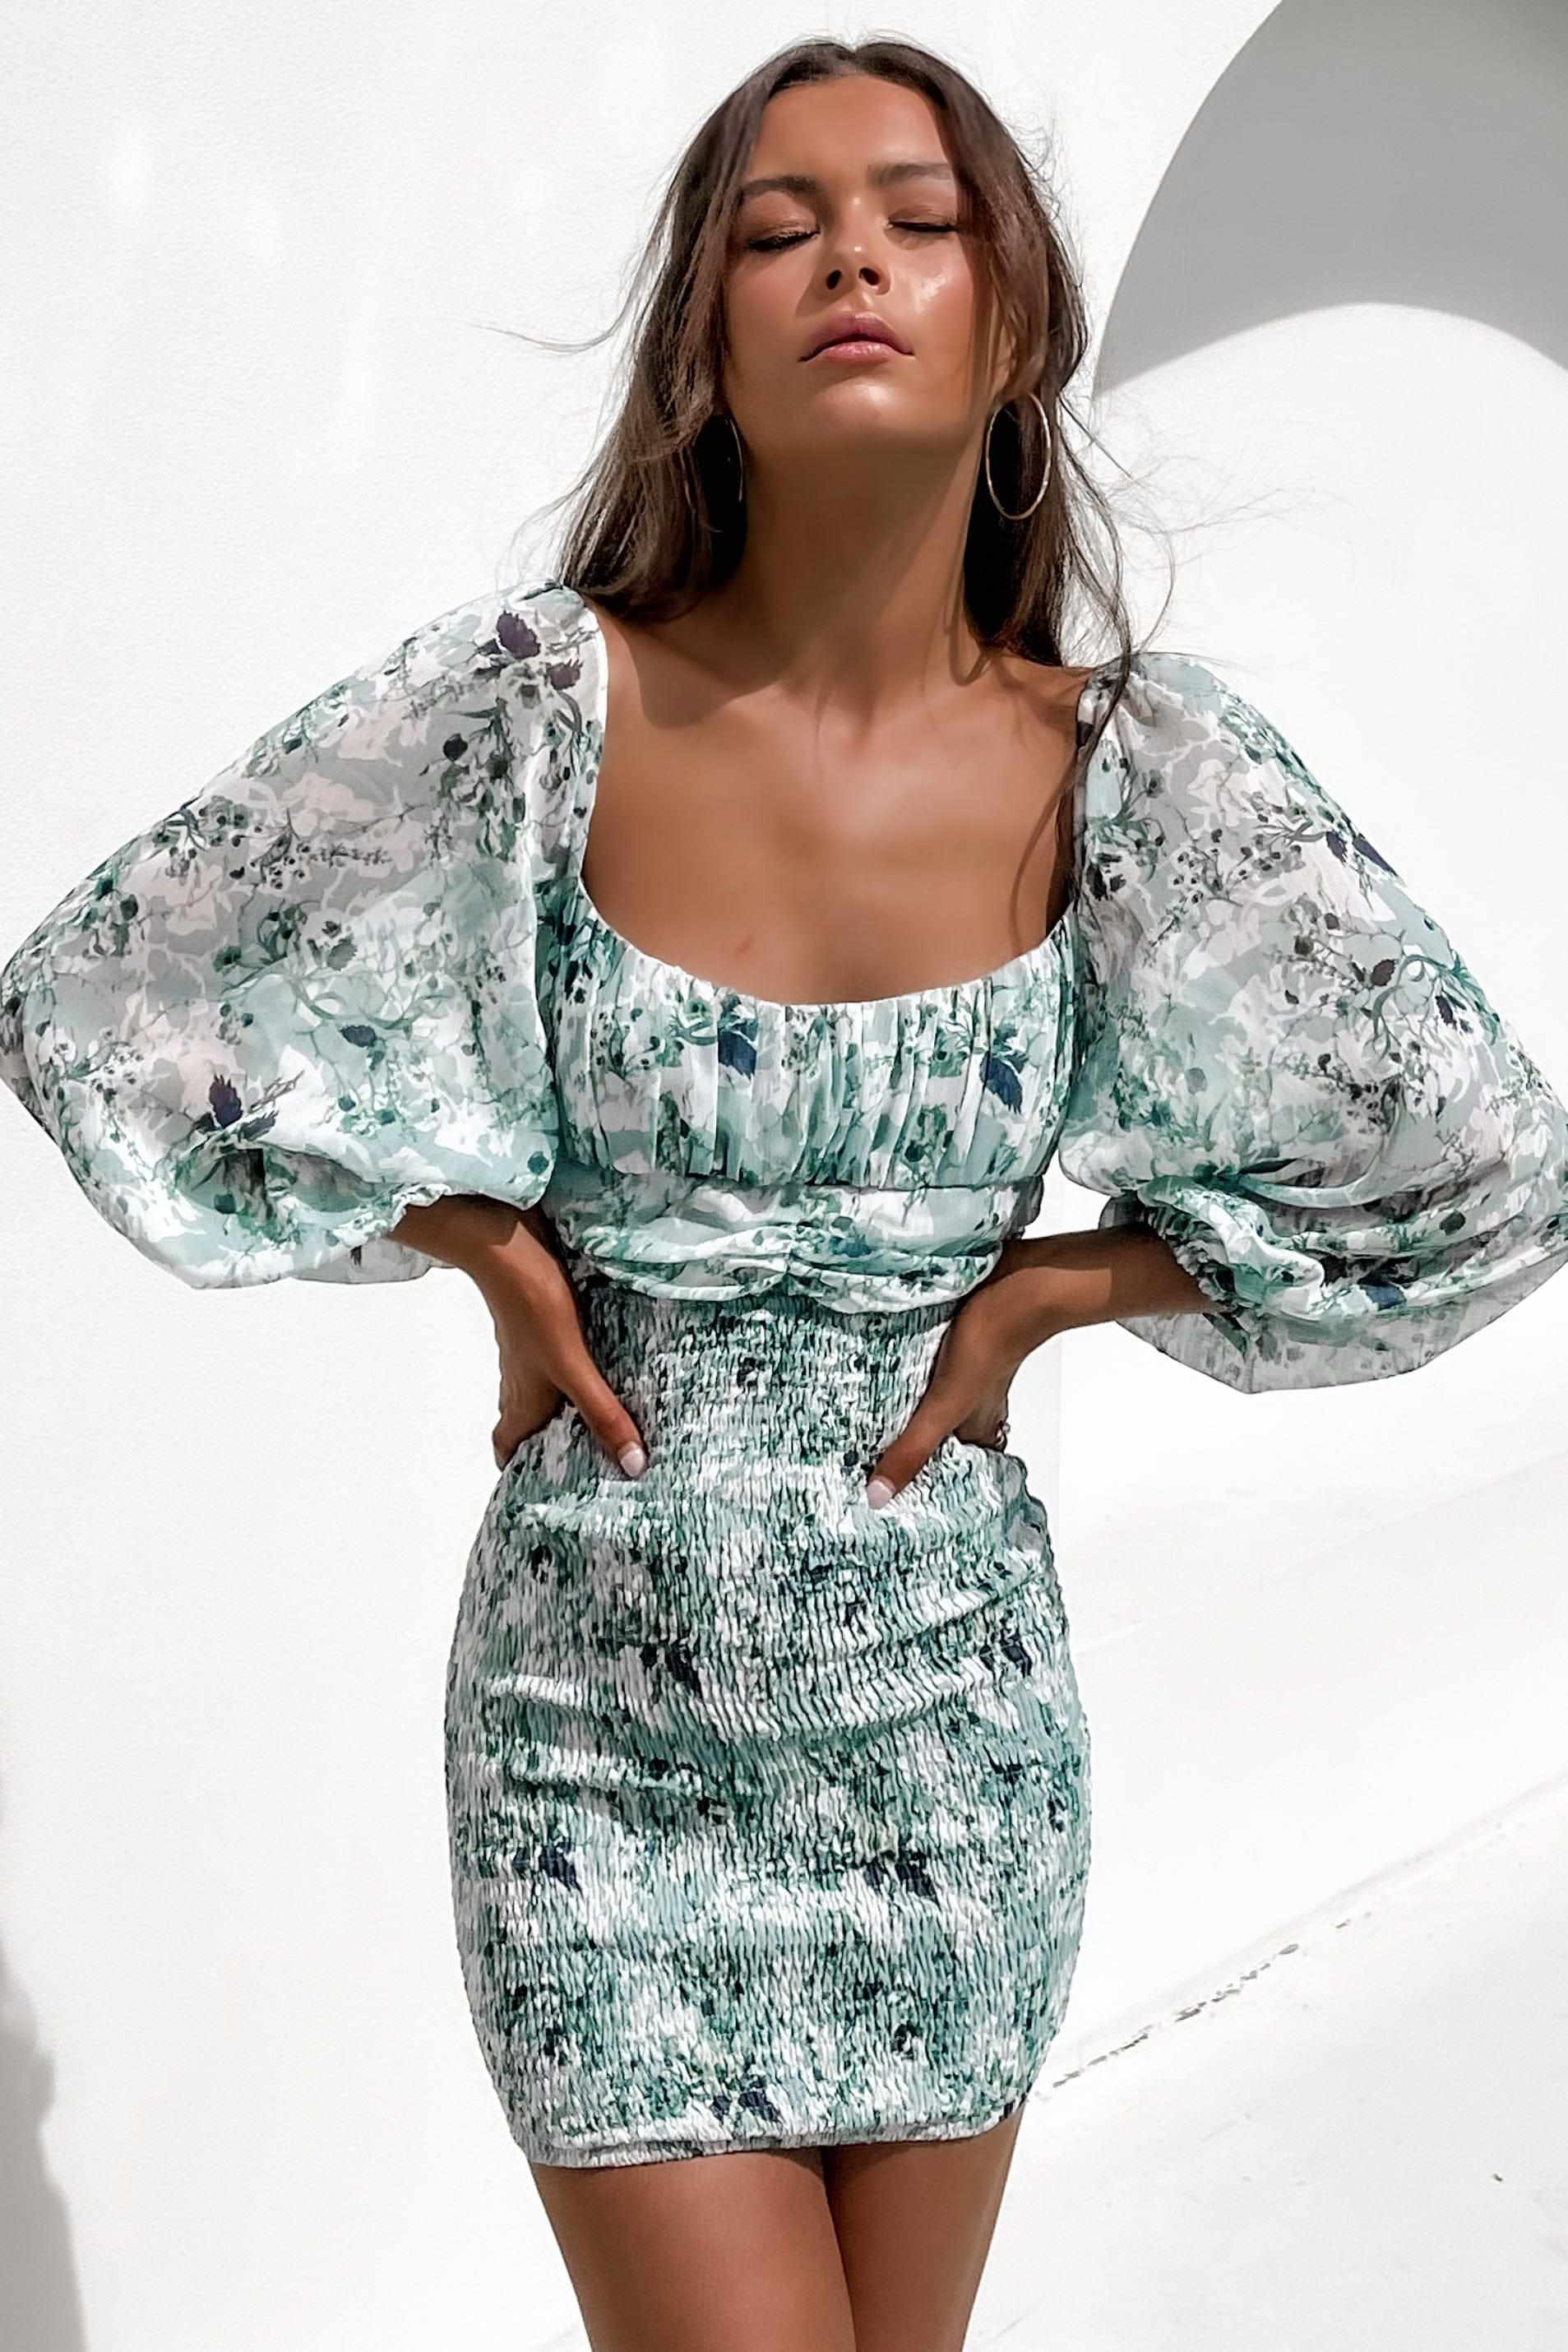 Auricle Dress, BALLOON SLEEVE, BLUE, DRESS, DRESSES, ELASTIC, GATHERED, LONG SLEEVE, NEW ARRIVALS, OFF SHOULDER, PATTERN, POLYESTER, Sale, Auricle Dress only $79.00 @ MISHKAH ONLINE FASHION BOUTIQUE, Shop The Latest Women's Dresses - Our New Auricle Dress is only $79.00, @ MISHKAH ONLINE FASHION BOUTIQUE-MISHKAH